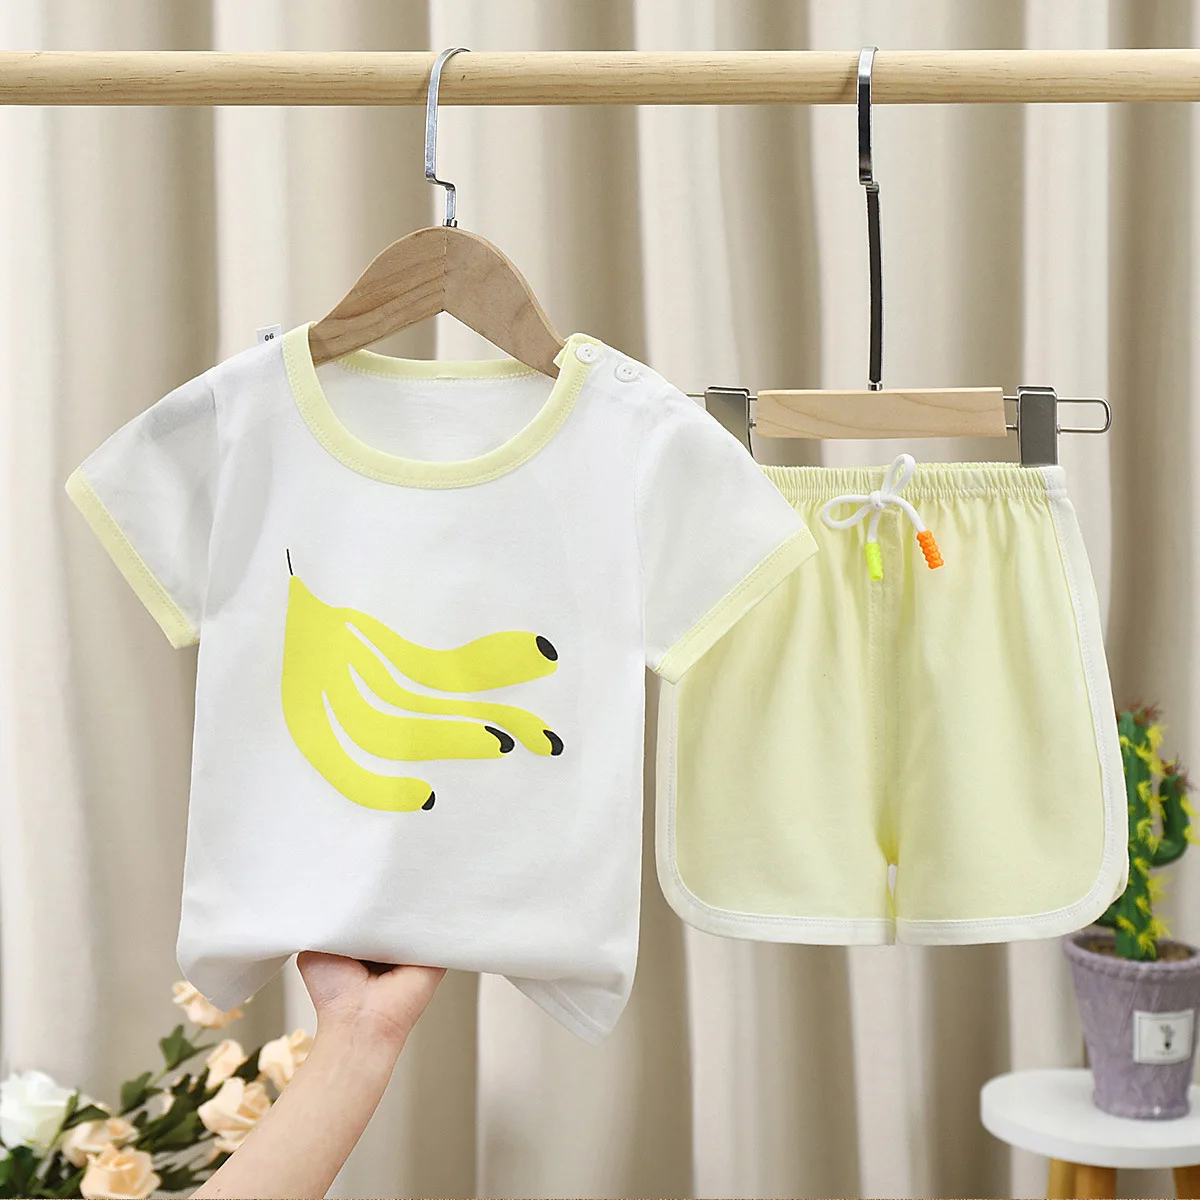 Cartoon Print Baby Clothes Set Pure Cotton T-shirt And Short Summer Tracksuit For Kids Baby Boy Girls Toddler Costume Causal Set baby floral clothing set Baby Clothing Set